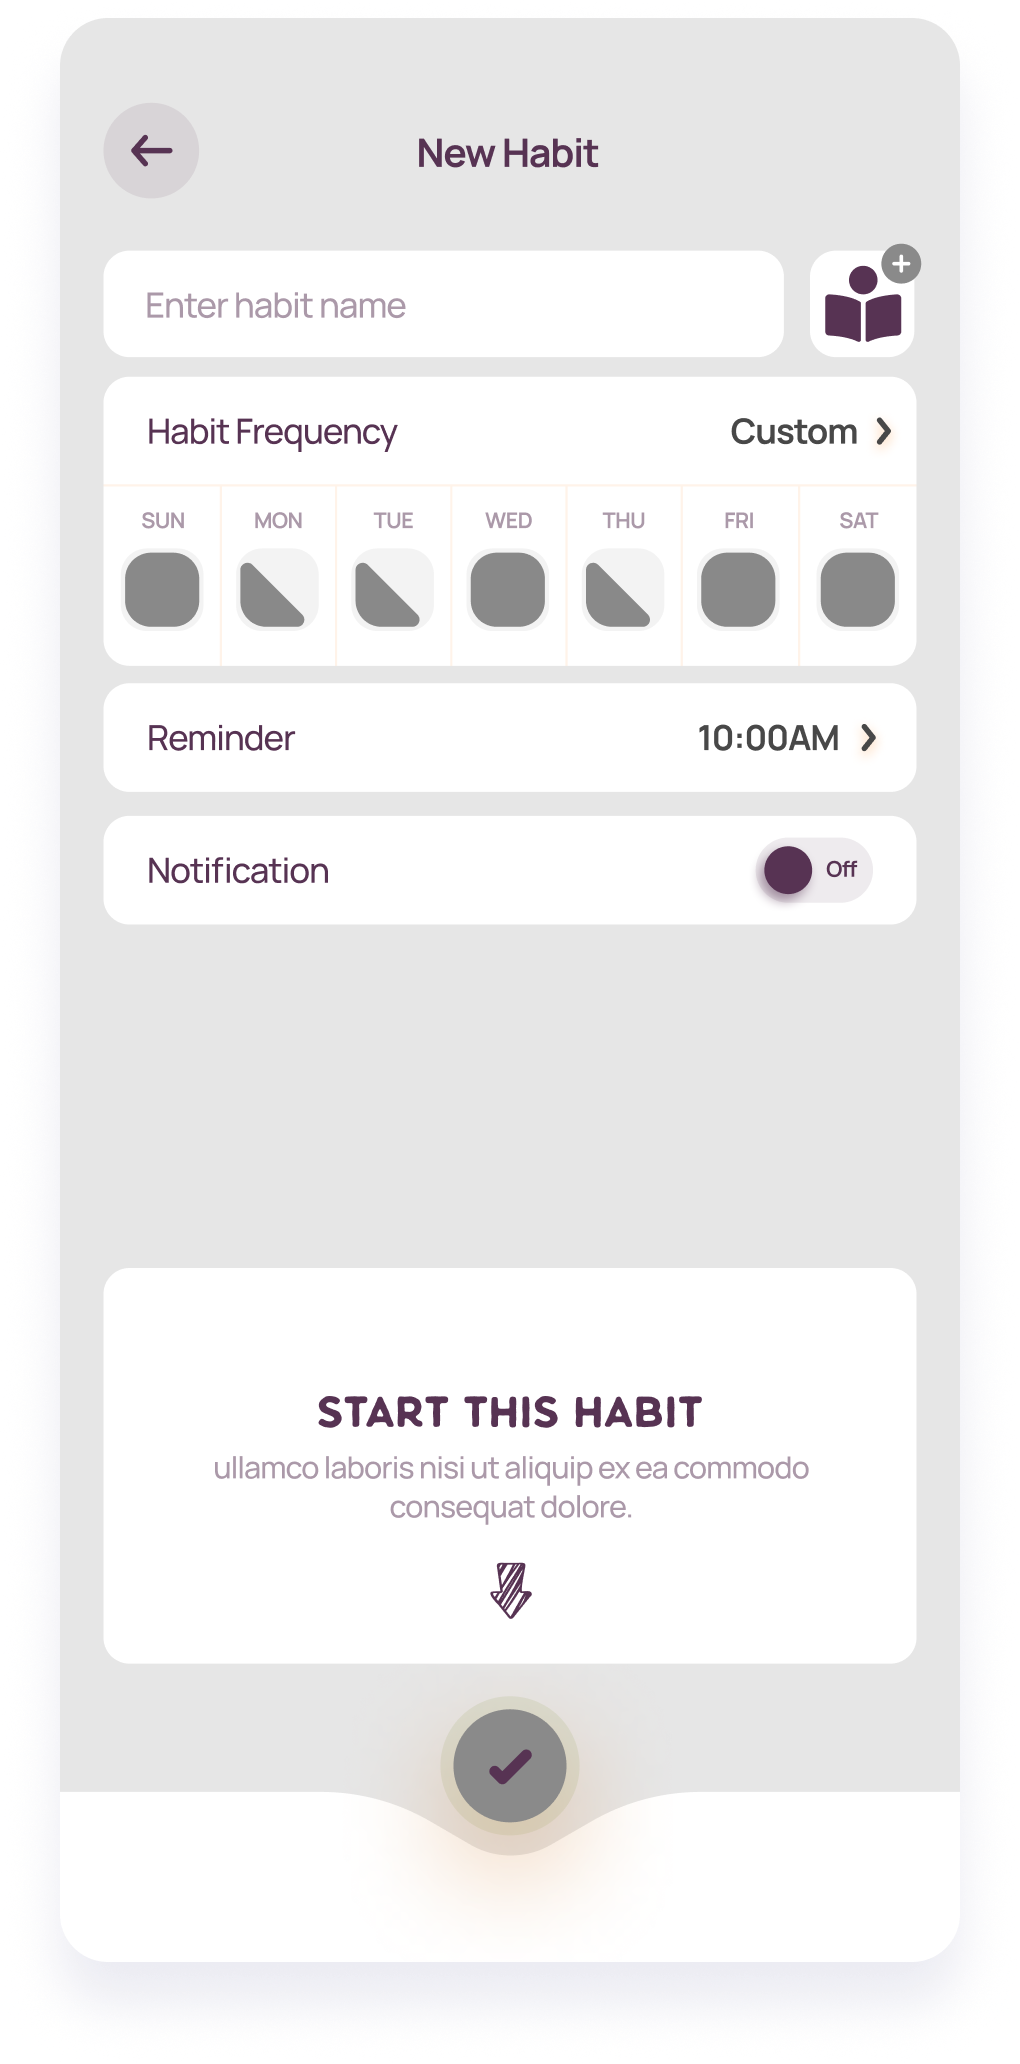 Wireframe of a LifeBalance screen for creating a new habit